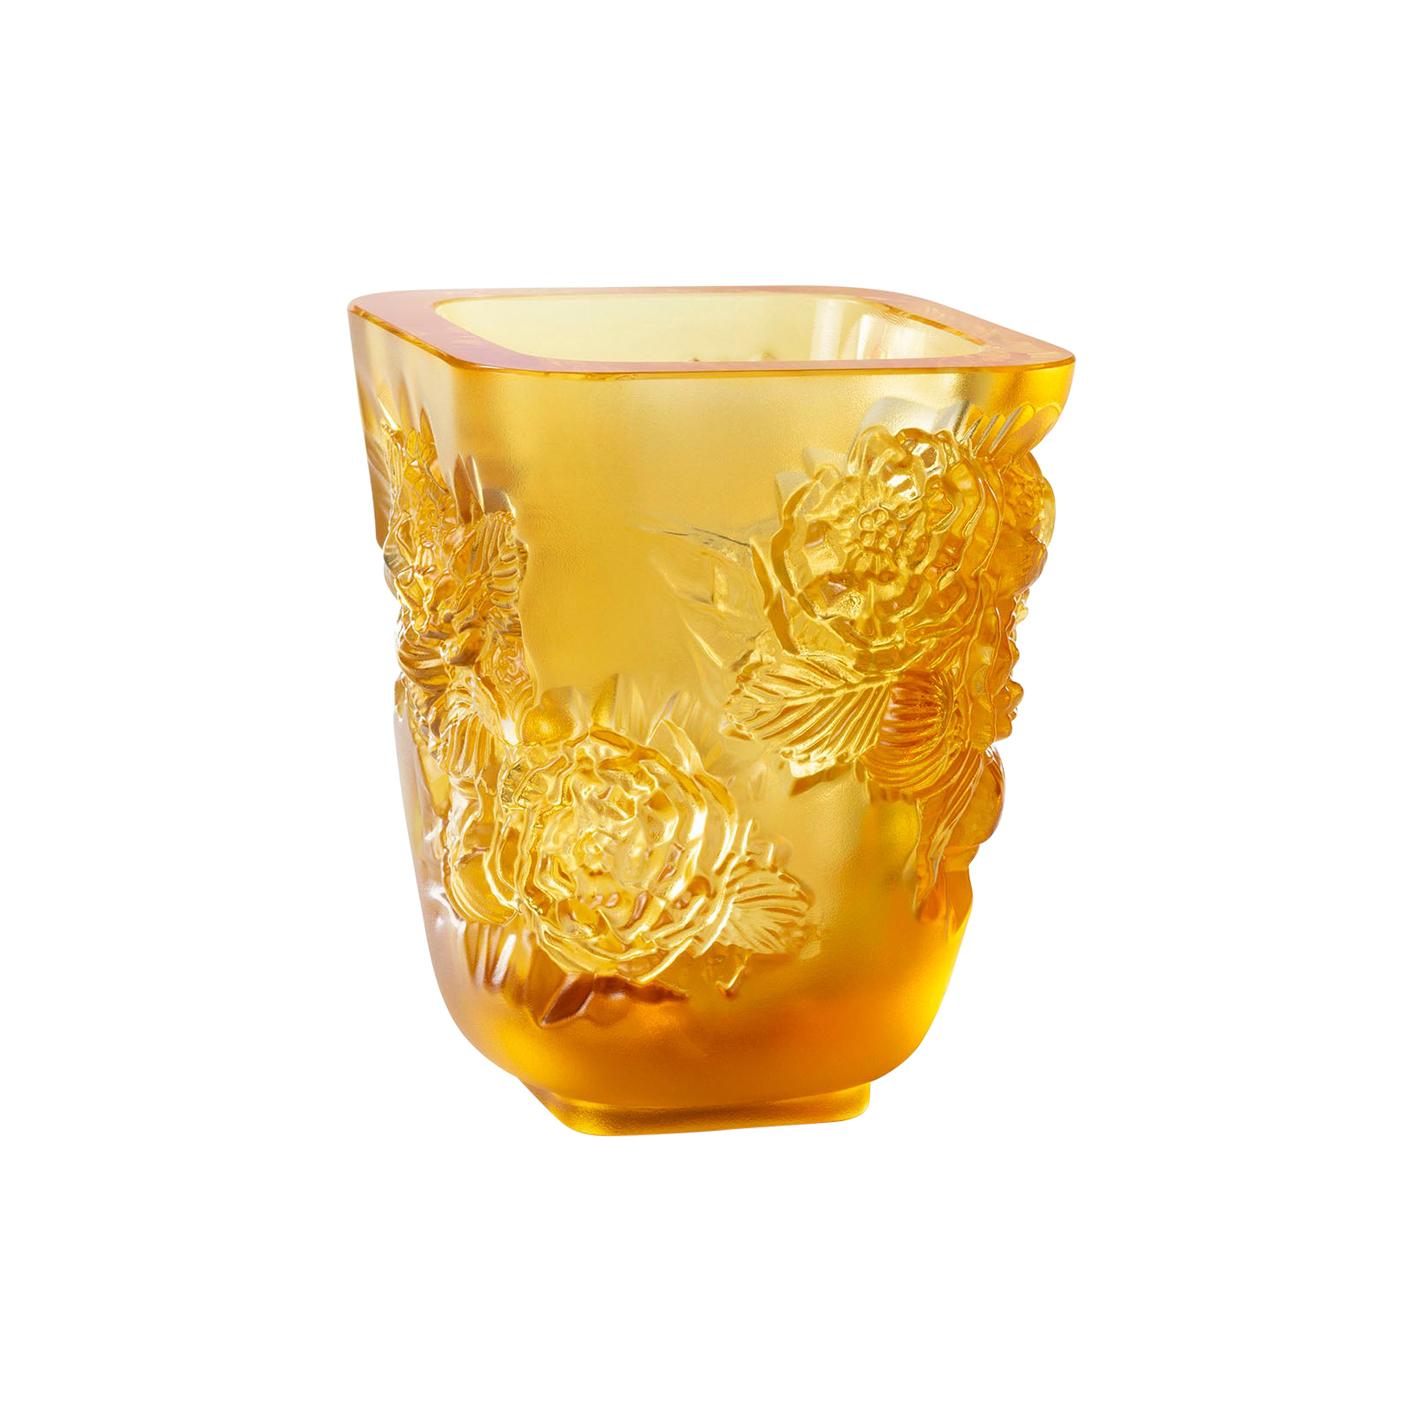 Lalique Pivoines Vase Small Size Amber Crystal